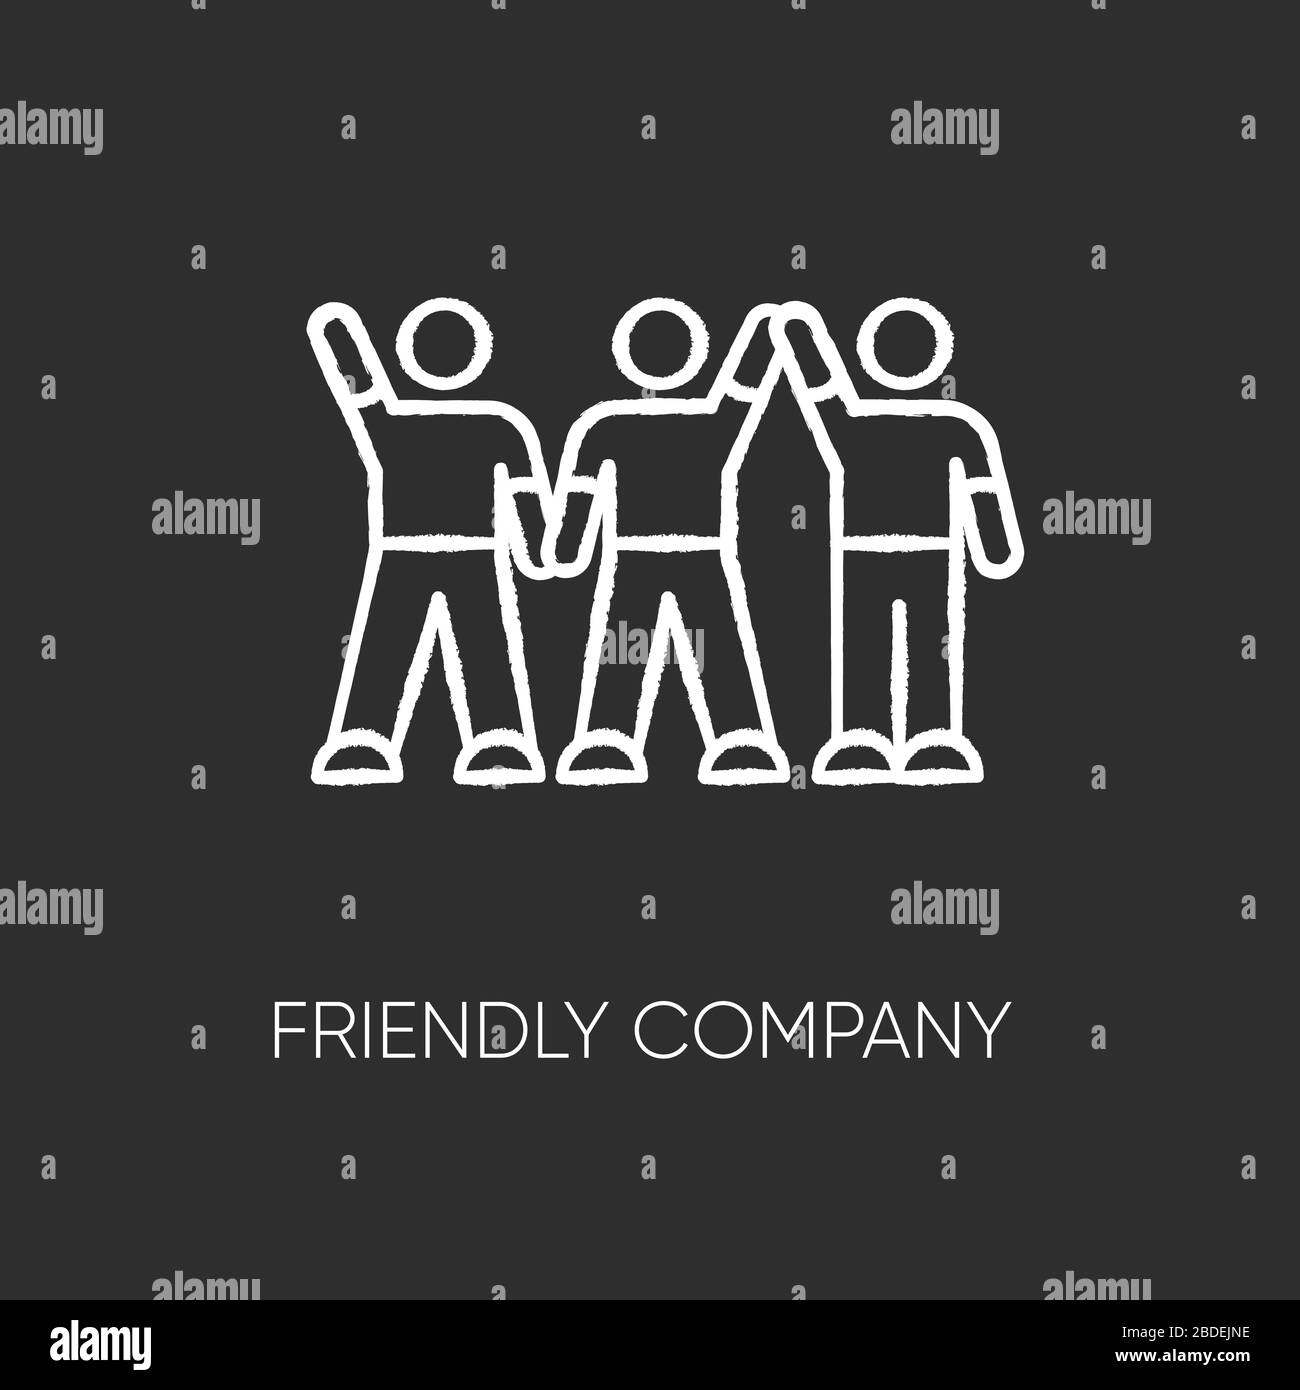 Friendly company chalk white icon on black background. Friendship, social communication, fellowship. Best friends group spend time together. Isolated Stock Vector